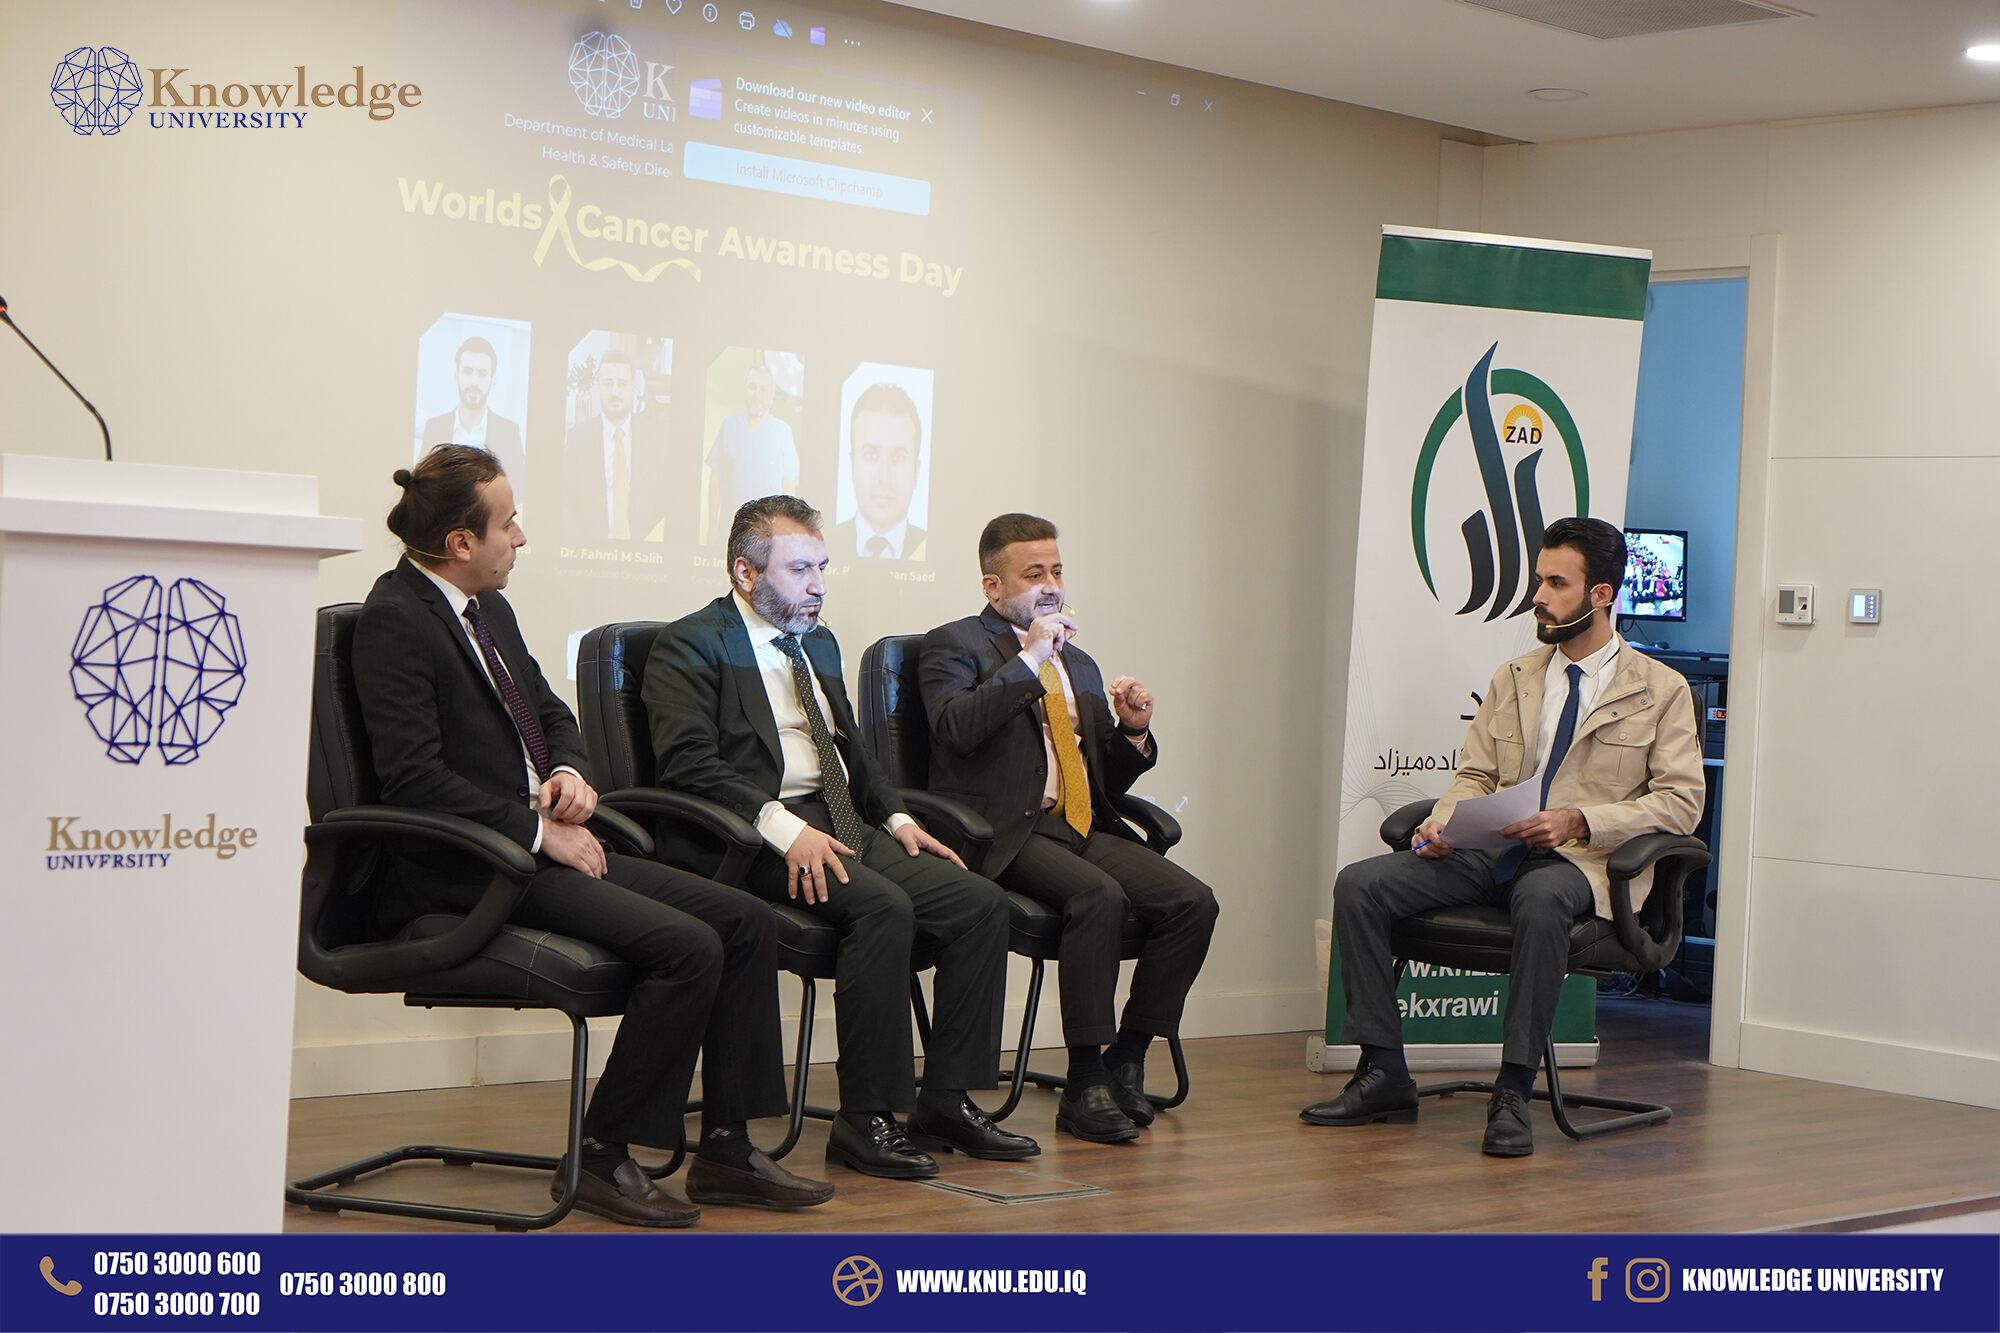 Knowledge University Hosts Scientific Panel on World Cancer Awareness Day